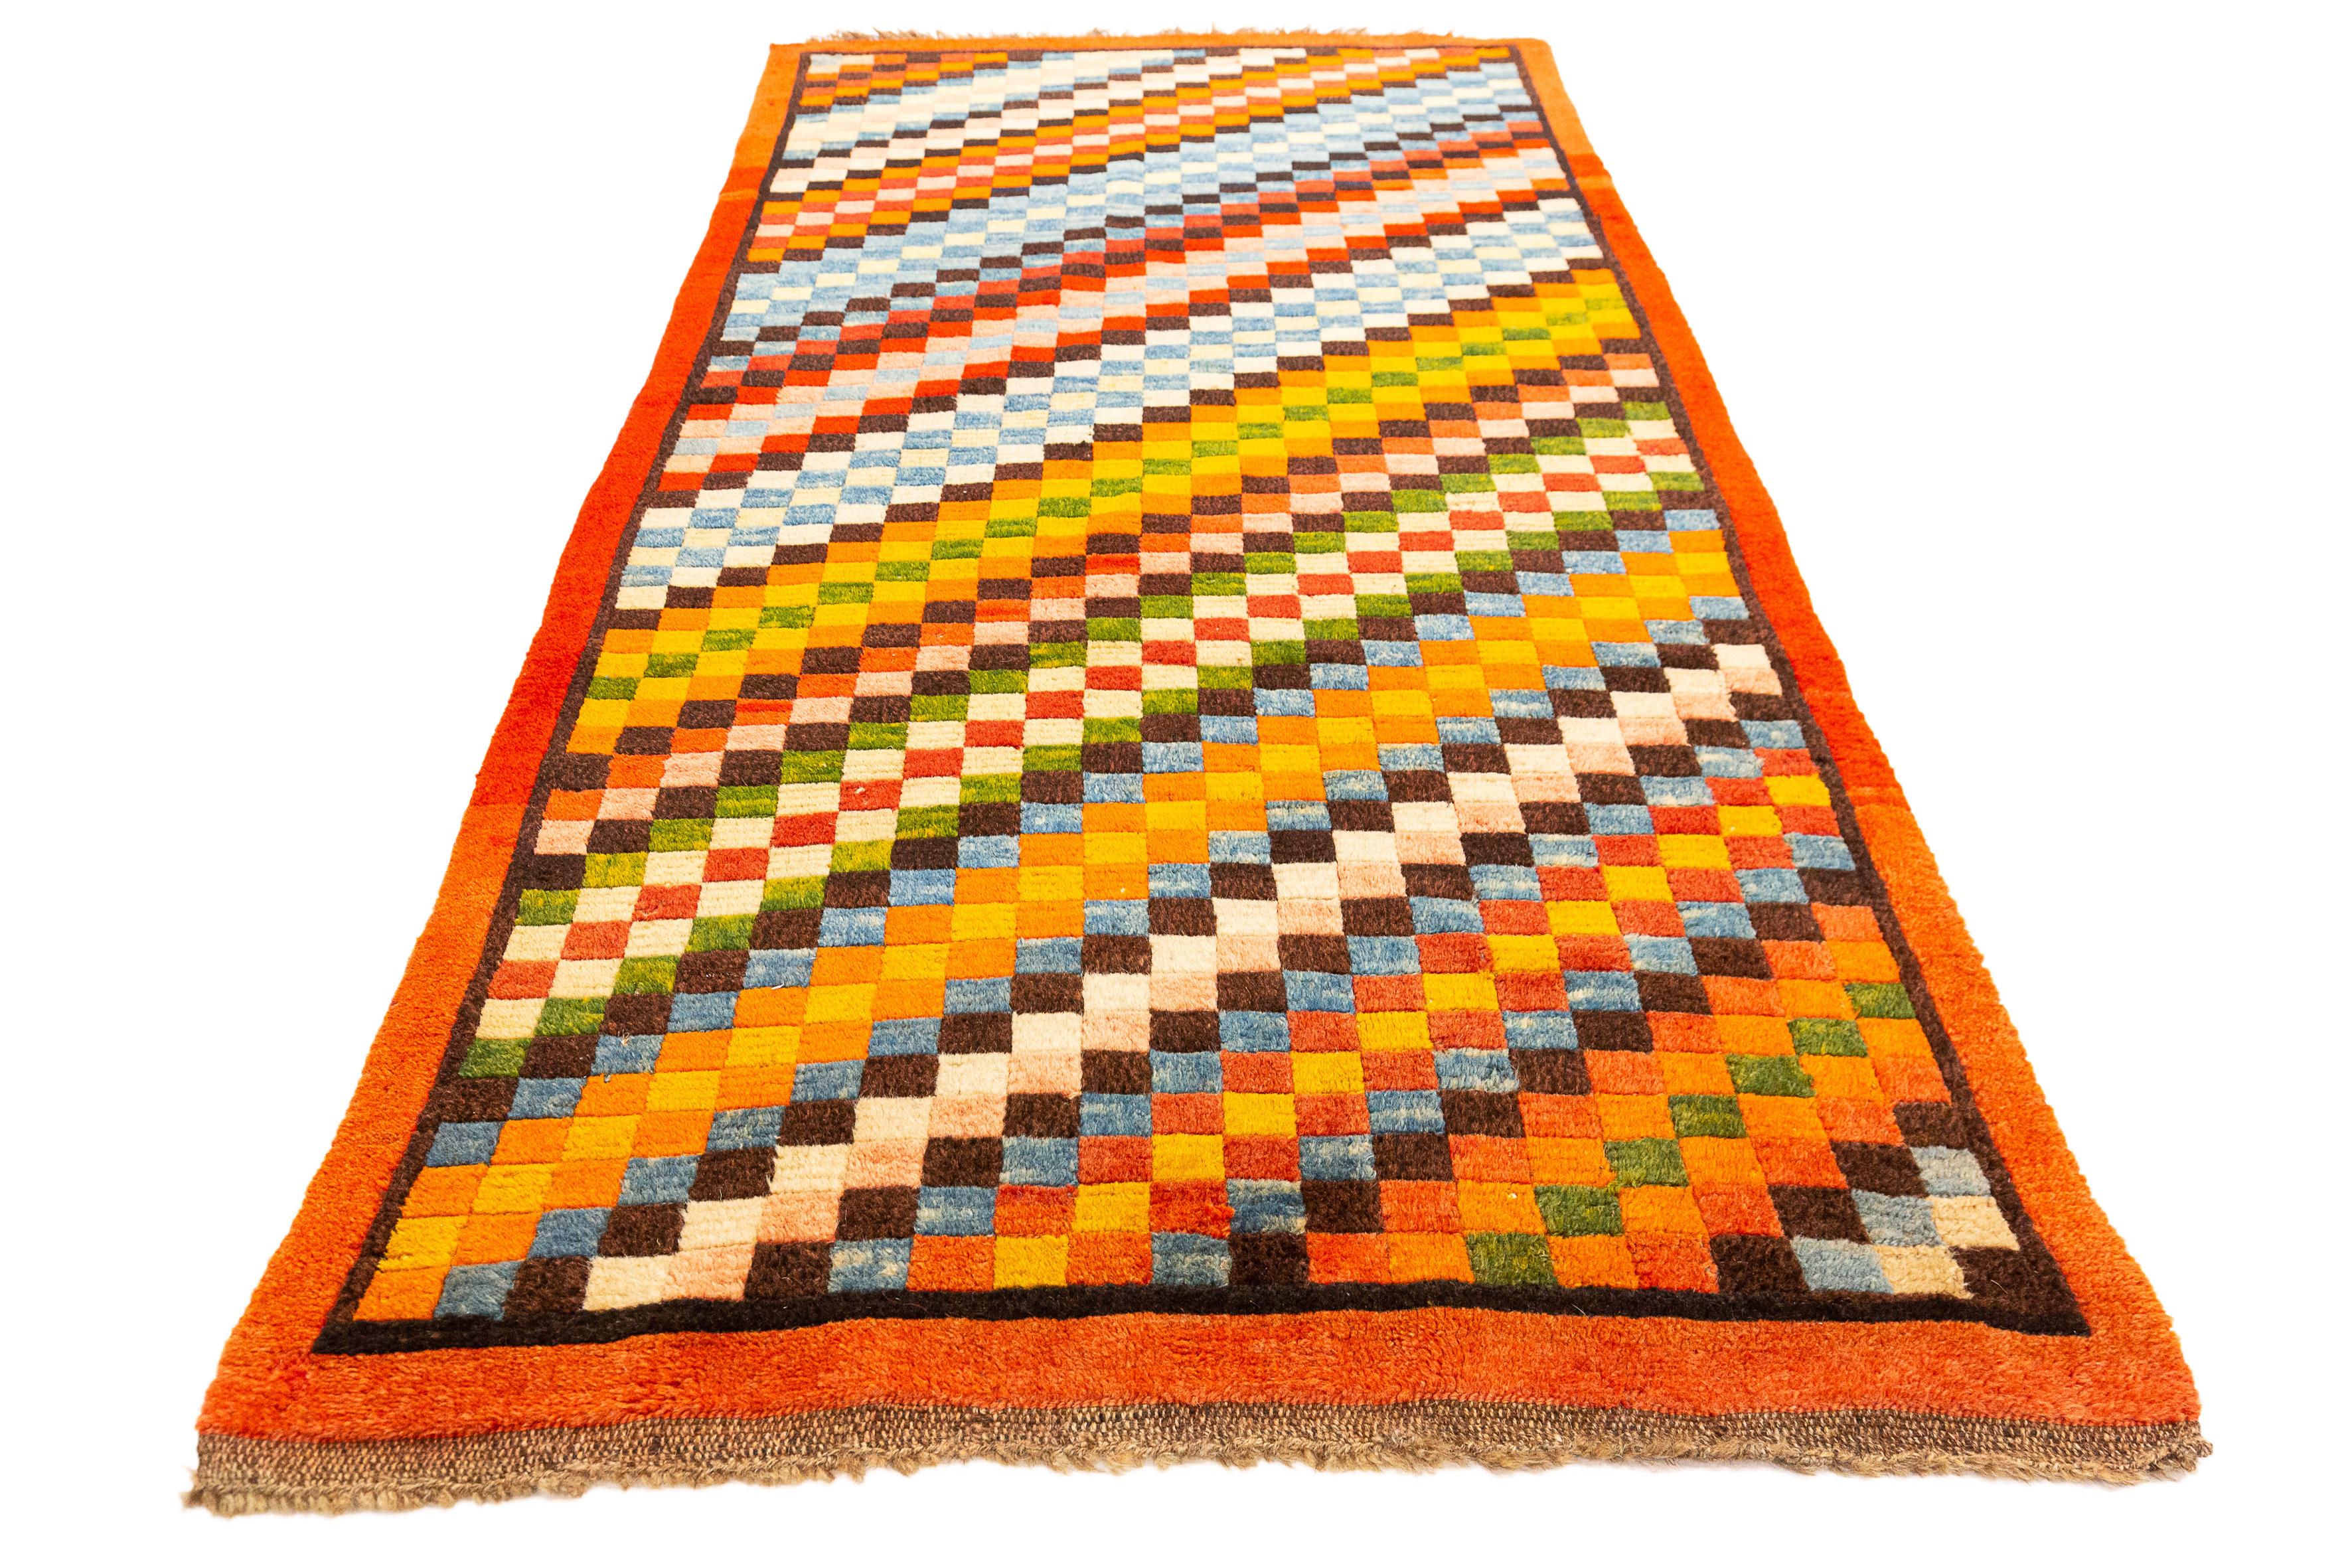 This rug is a vibrant example of Tibetan craftsmanship, featuring a bold, pixel-like checkered pattern that creates a sense of depth and movement. The design consists of an array of squares in a multitude of colors, including shades of orange, red,